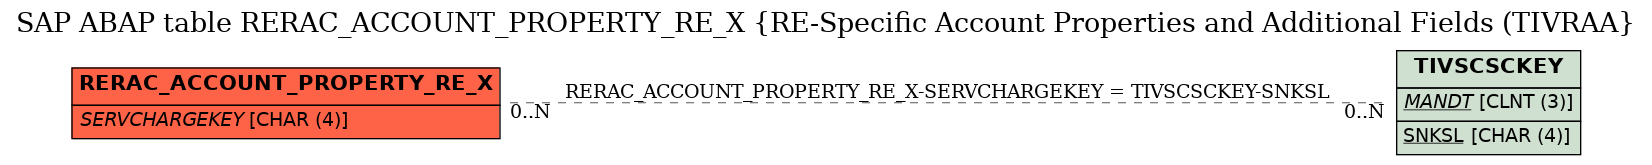 E-R Diagram for table RERAC_ACCOUNT_PROPERTY_RE_X (RE-Specific Account Properties and Additional Fields (TIVRAA)